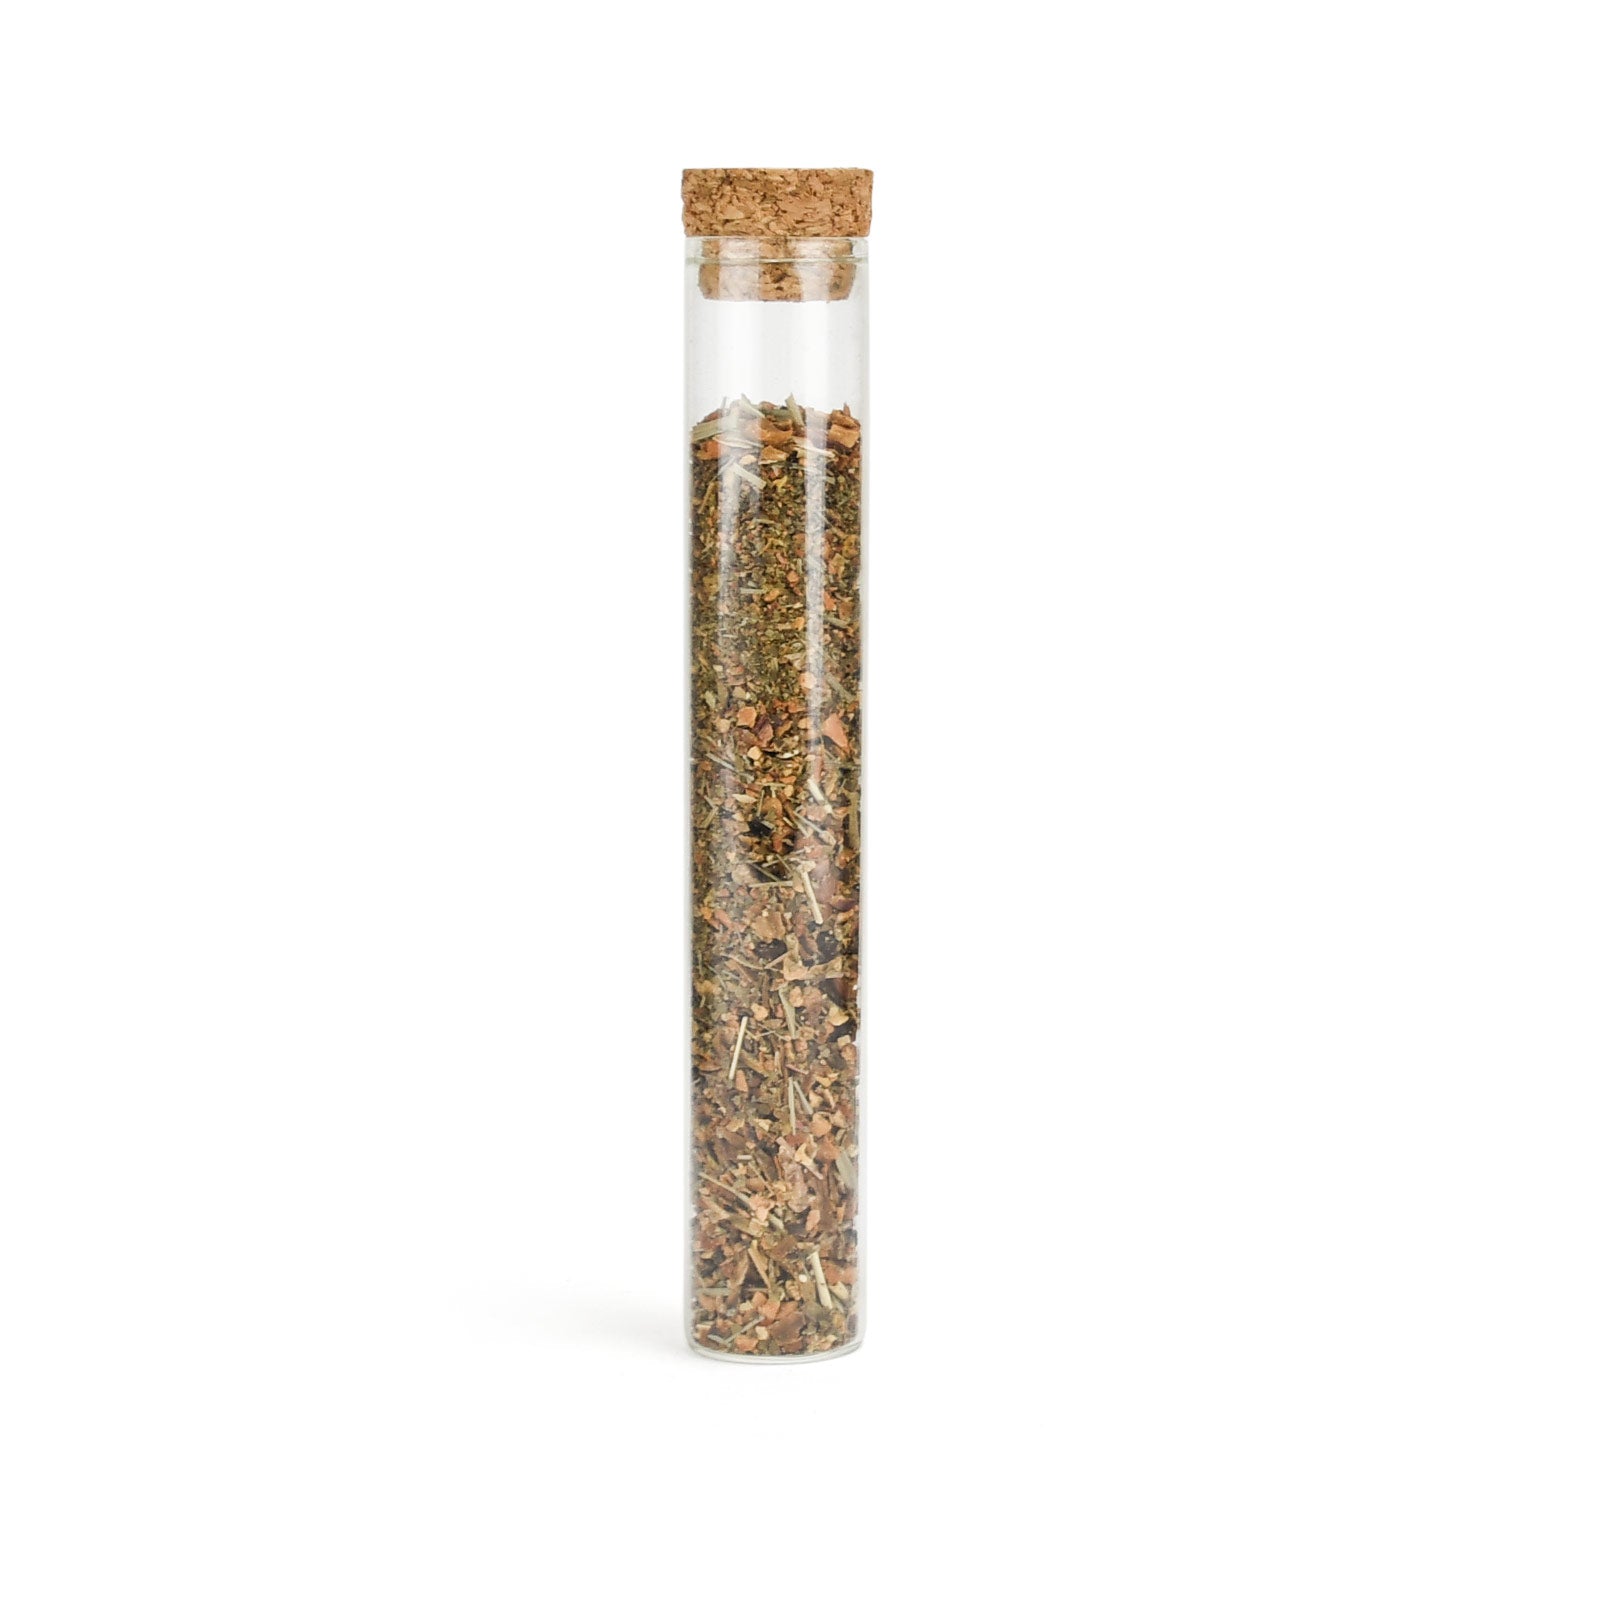 130mm Glass Pre-Roll Tube w/ Cork Top - 1 Count